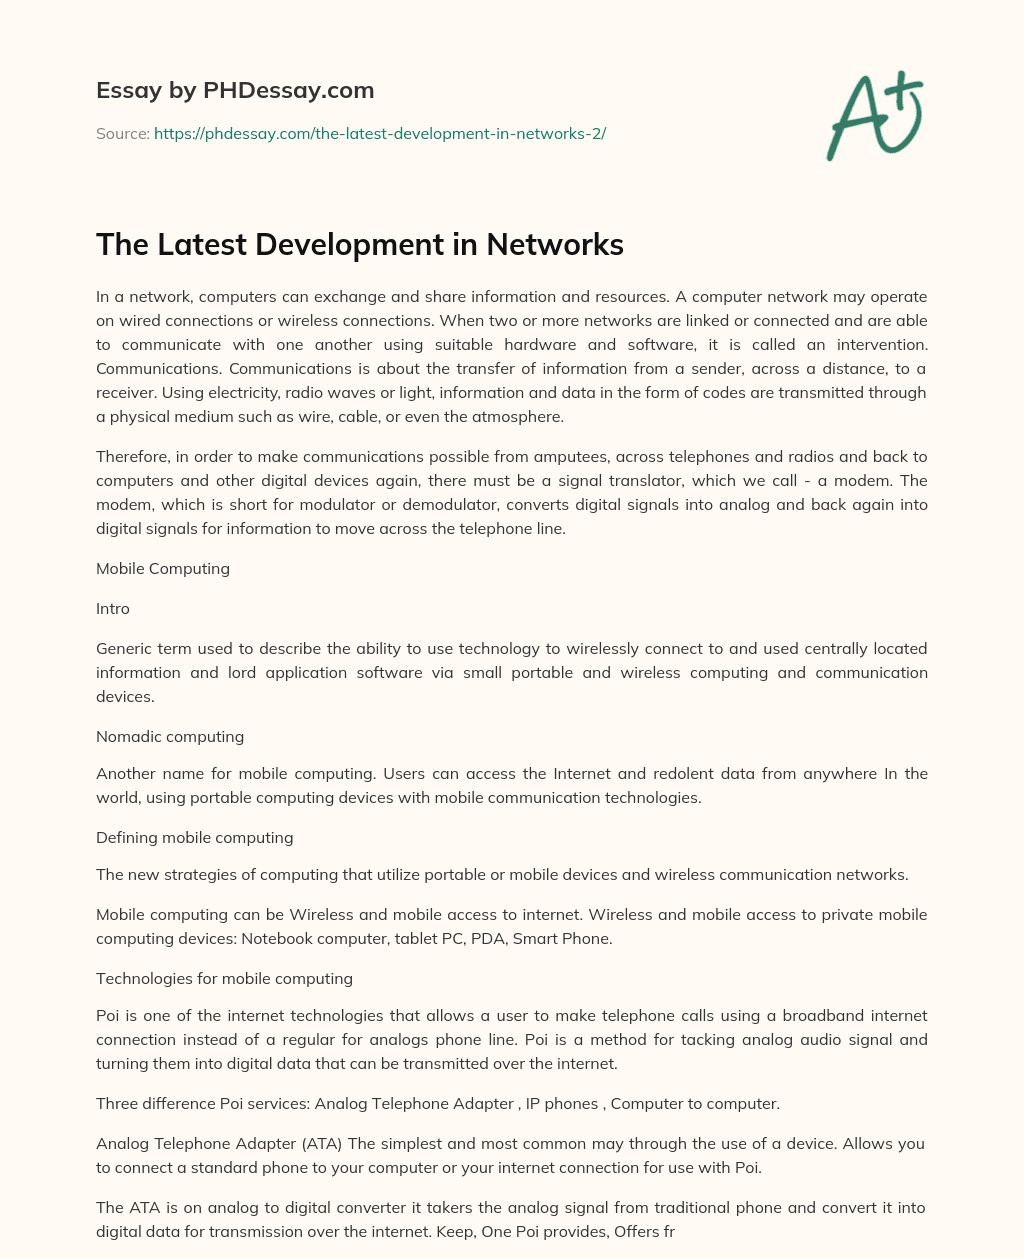 The Latest Development in Networks essay